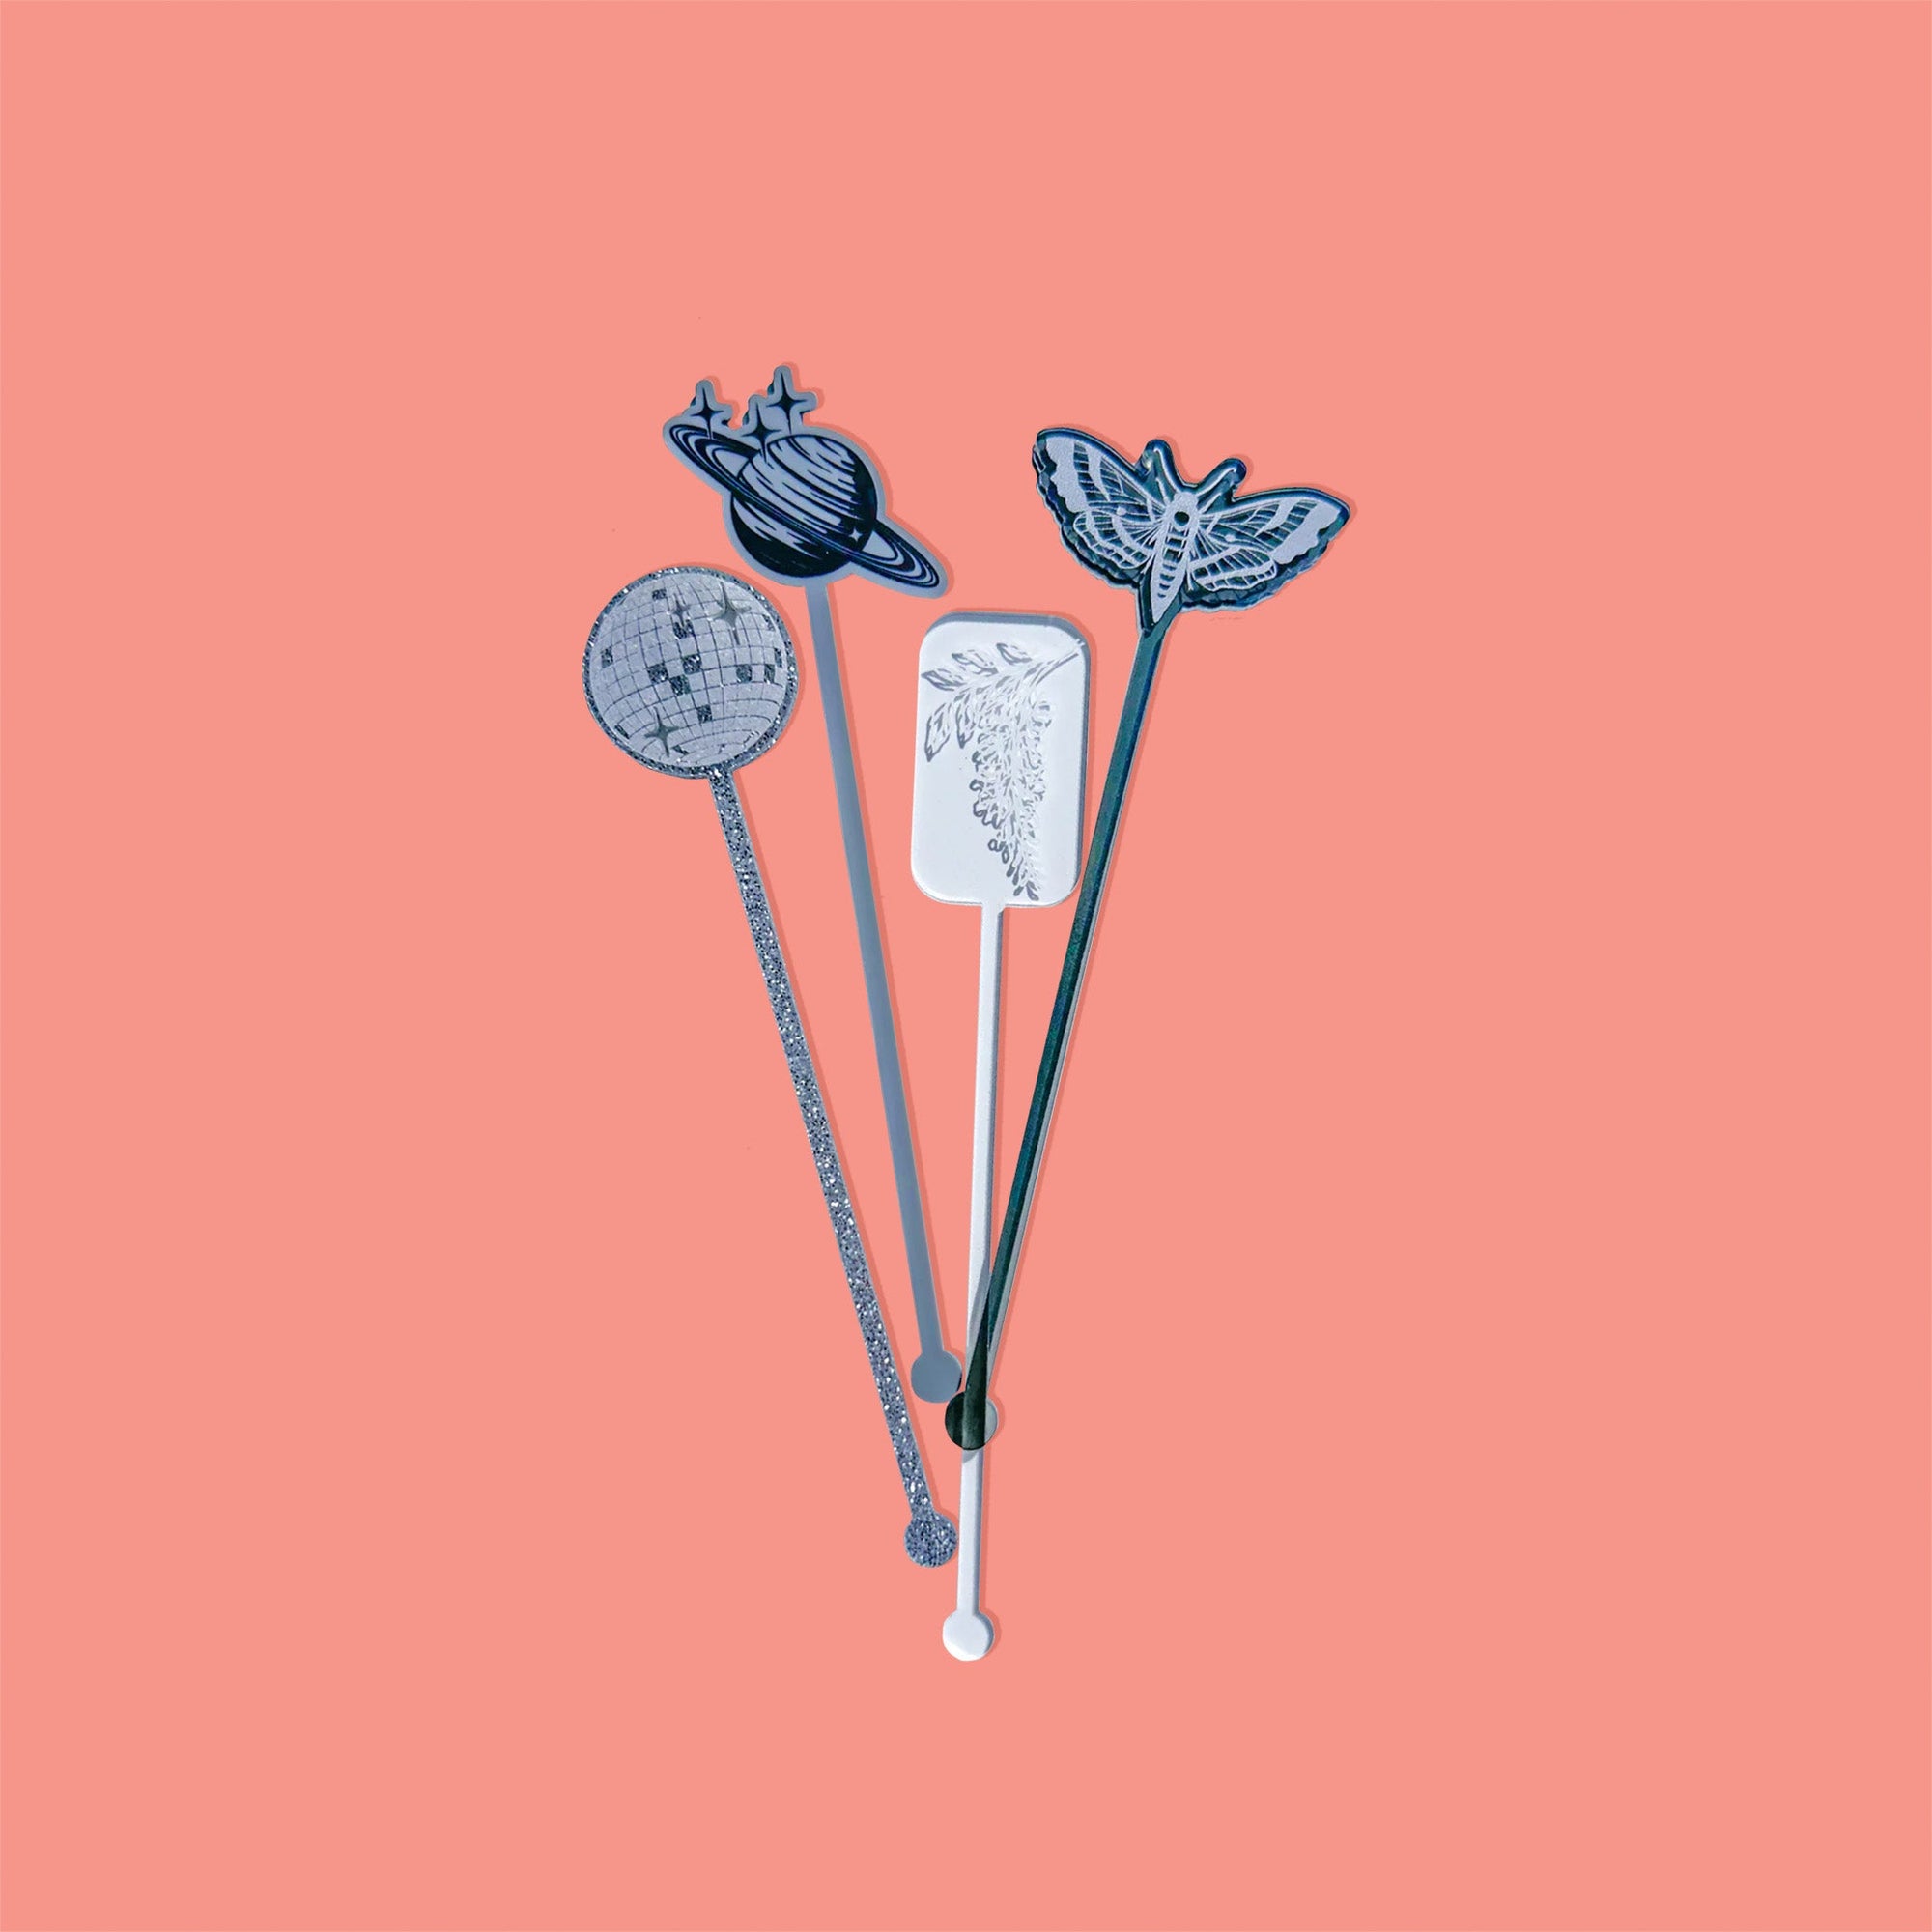 On a coral pink background sits acrylic stirrers. This Taylor Swift inspired set of 4 stirrers includes a silver glitter mirrorball, a clear transparent rectangle with white wisteria, a gray opaque Saturn sketch, and a gray smoke moth.